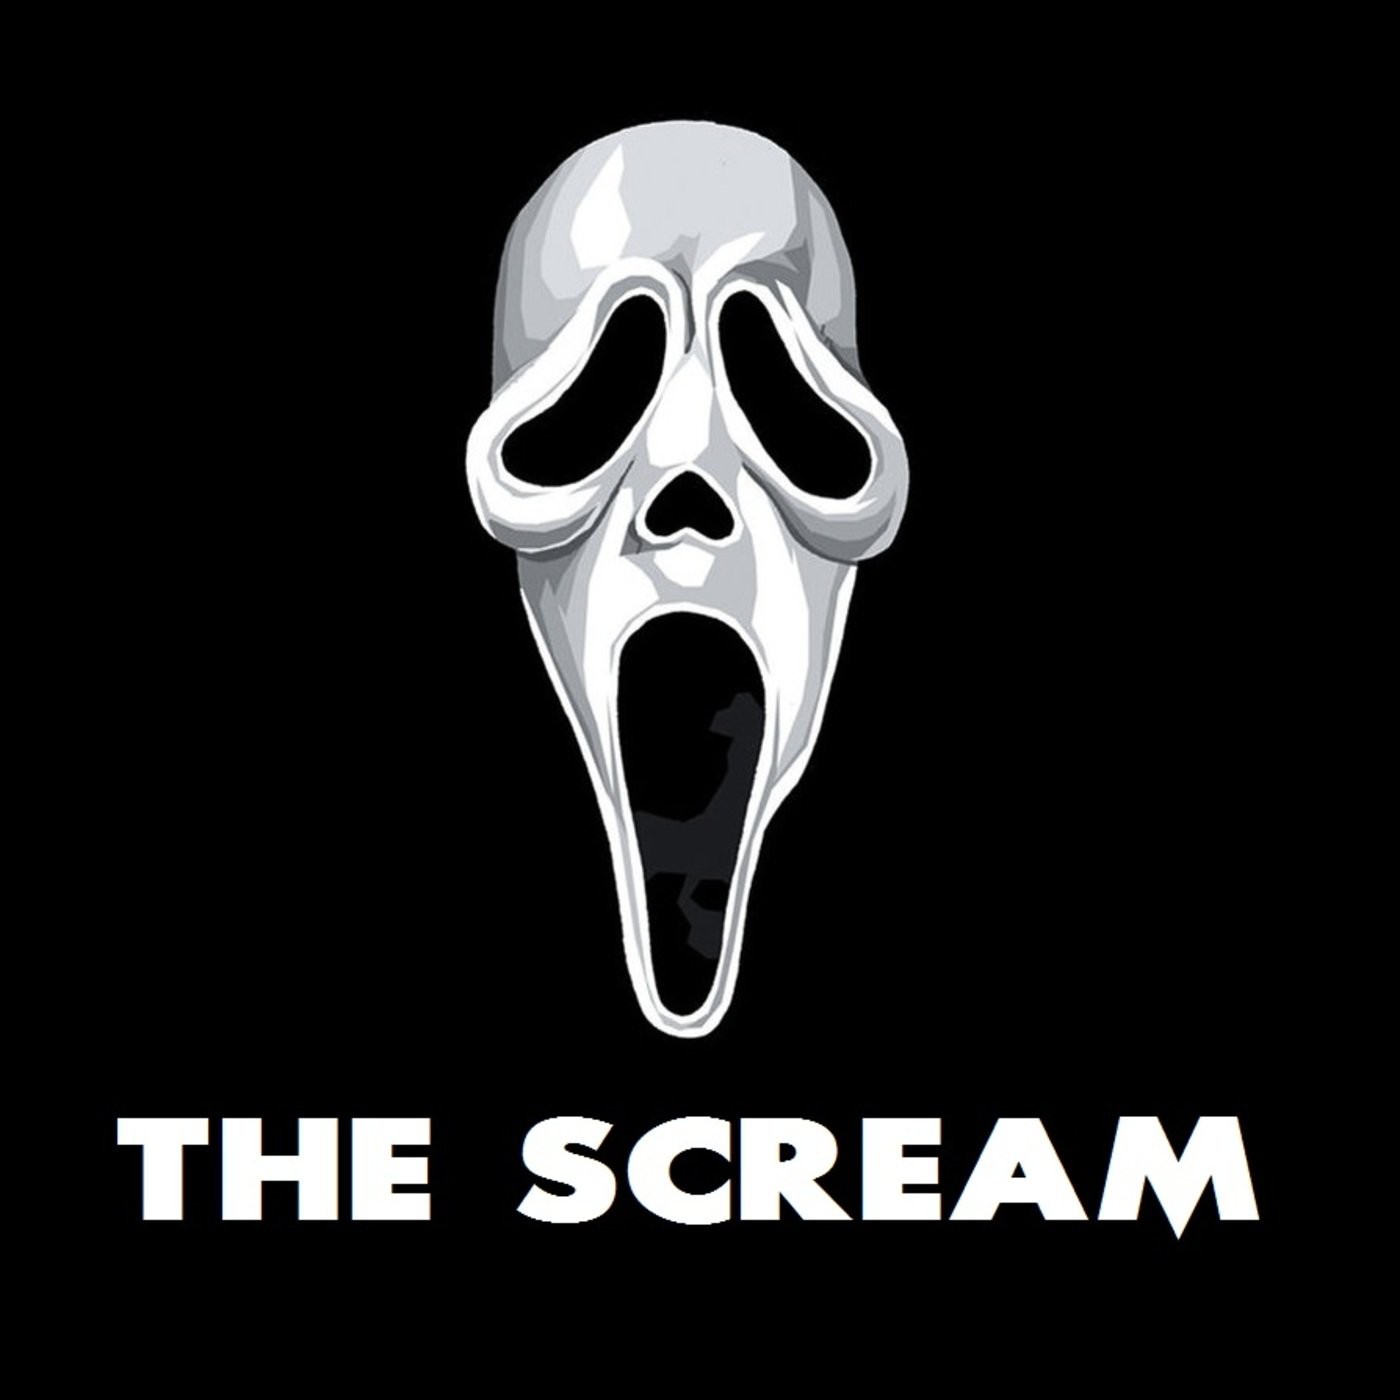 The Scream - Podcast en iVoox